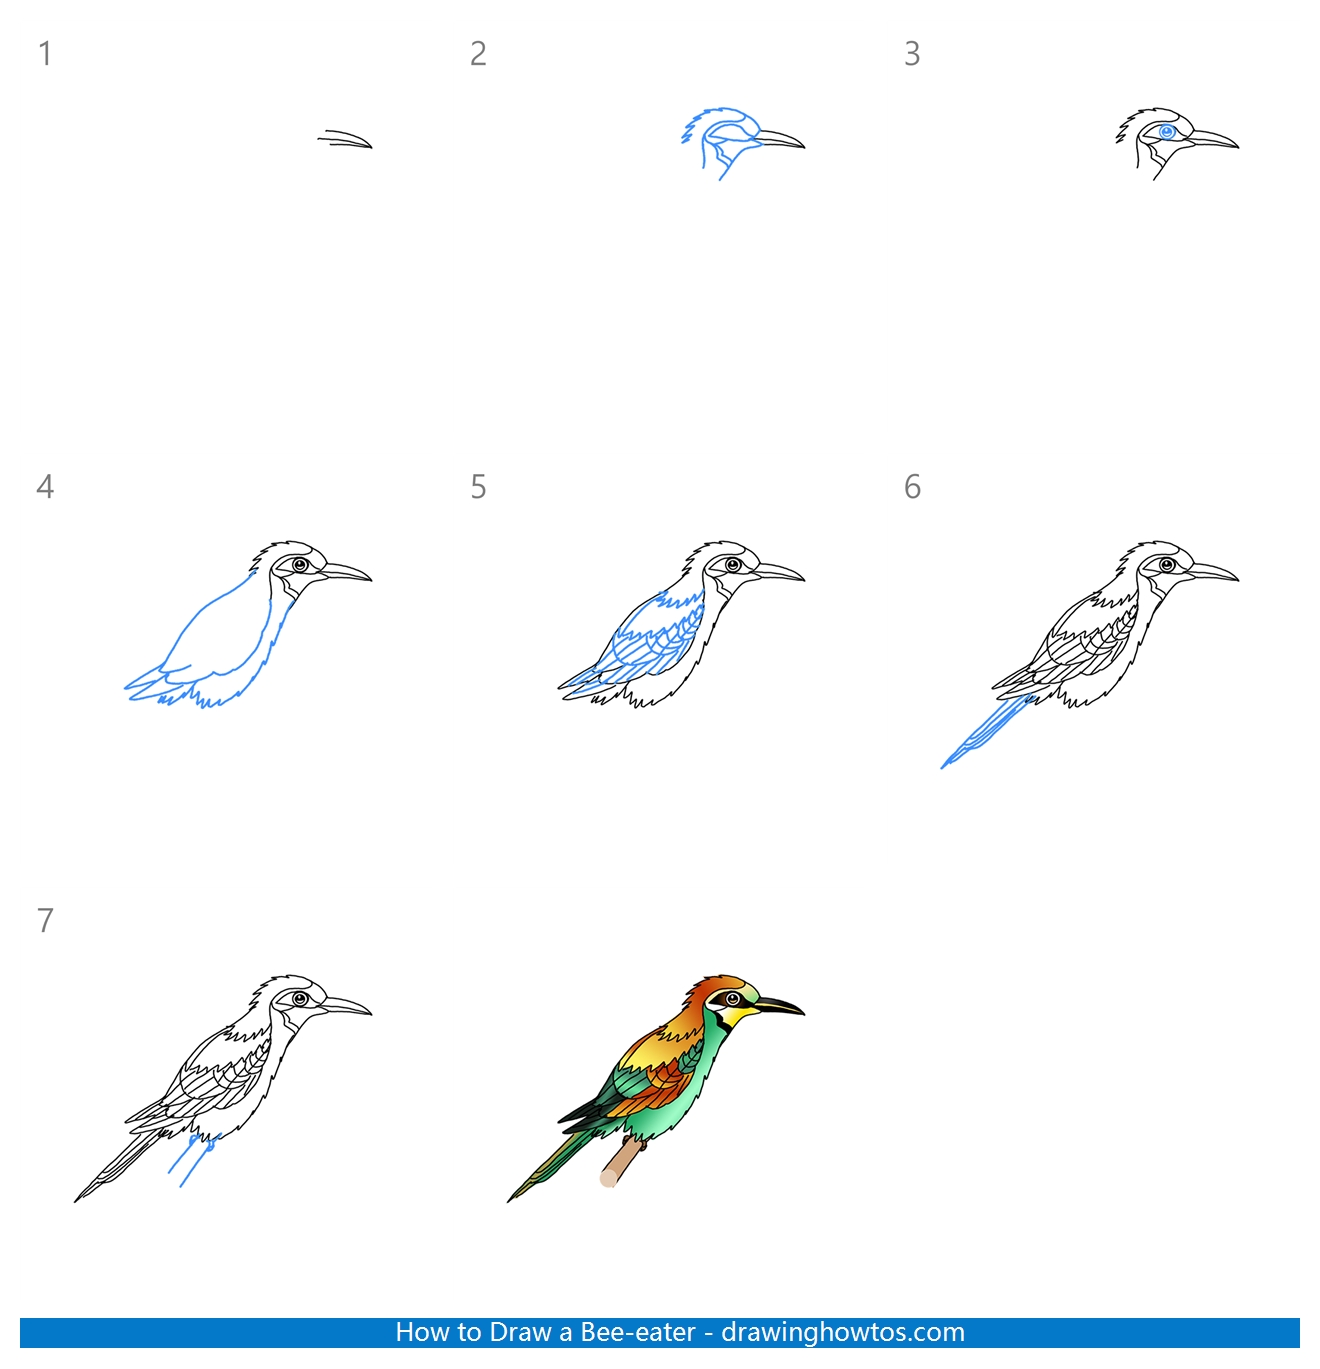 How to Draw a Bee-eater Step by Step